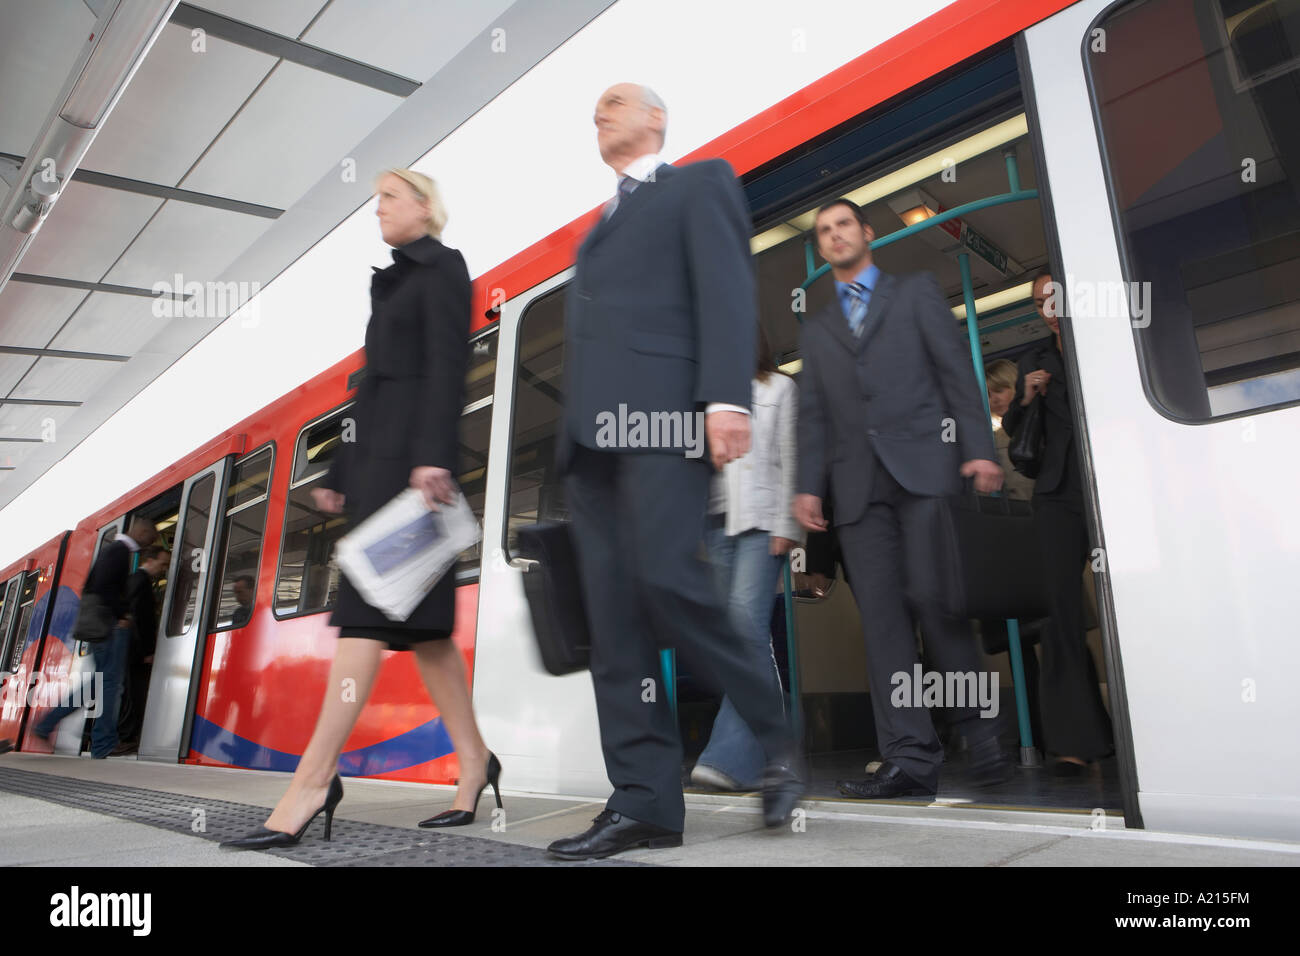 Business Commuters Getting off a Train, motion blur, low angle view Stock Photo